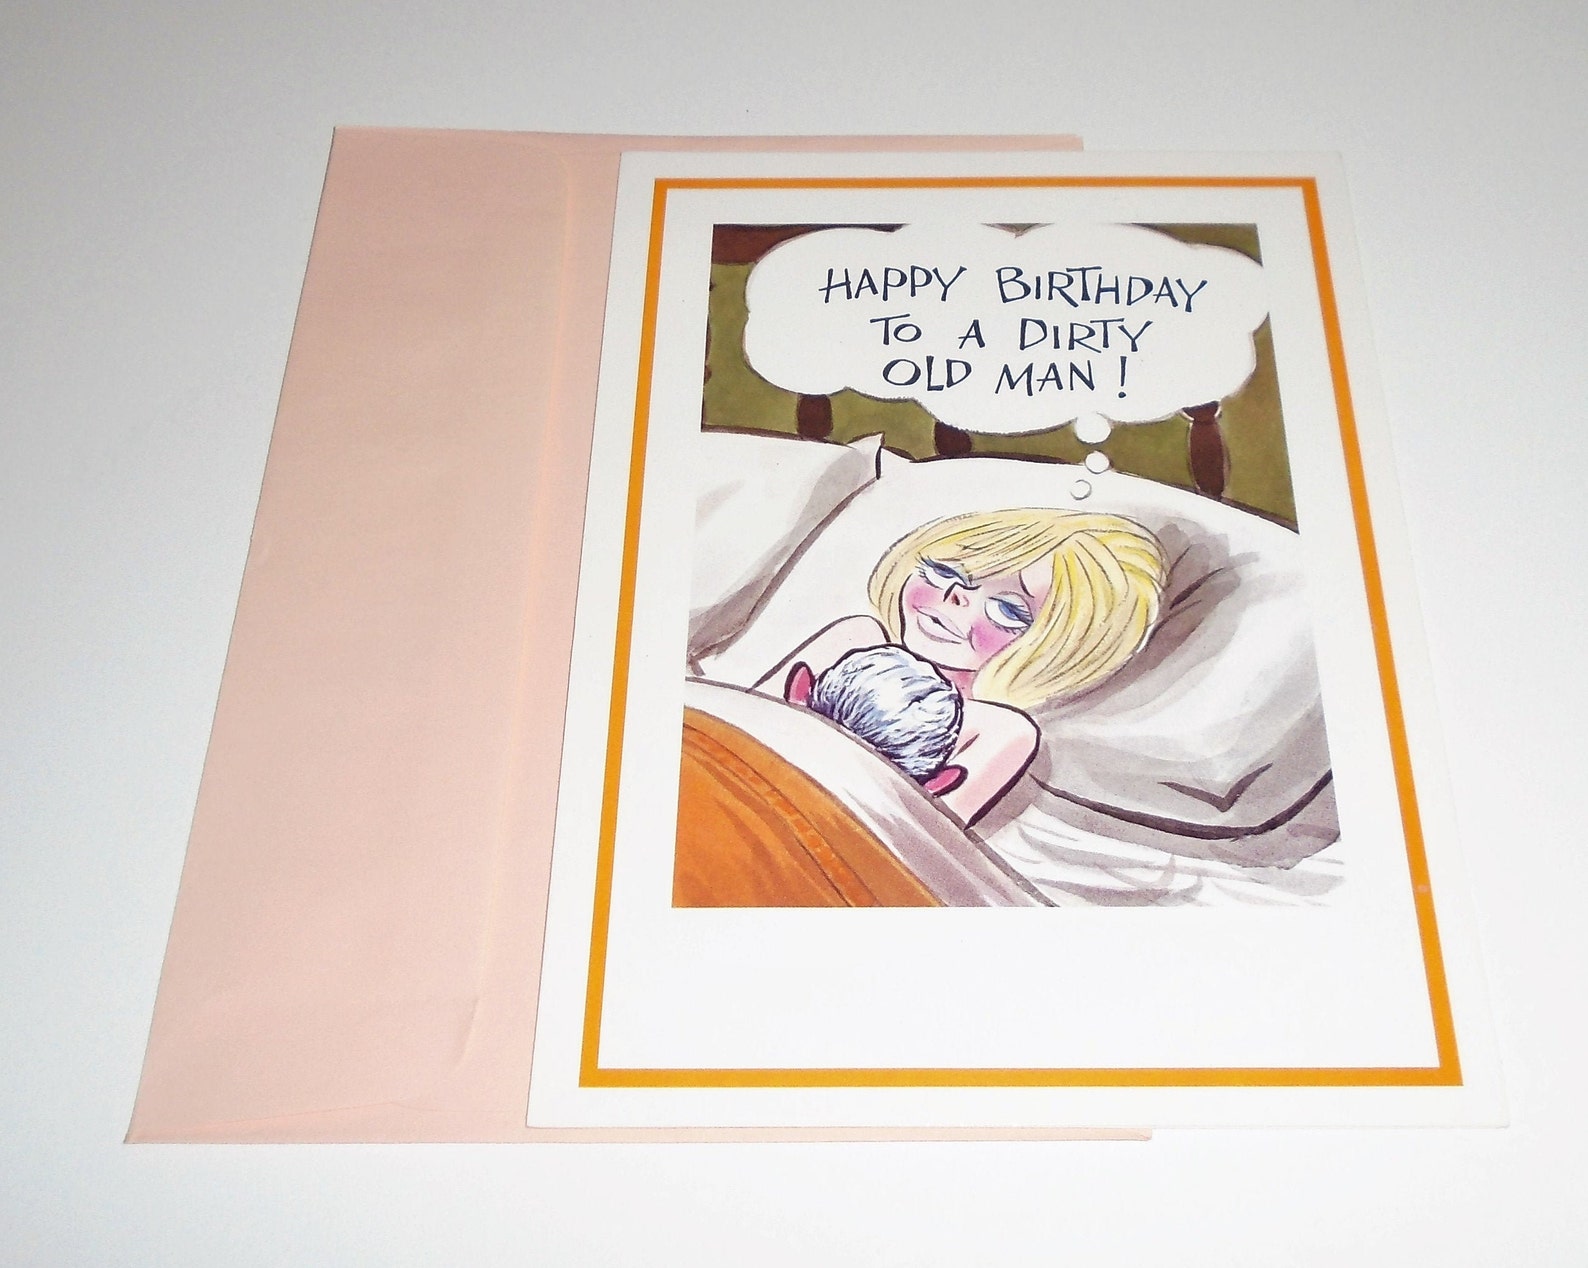 free-risque-birthday-cards-263-best-images-about-birthday-adult-on